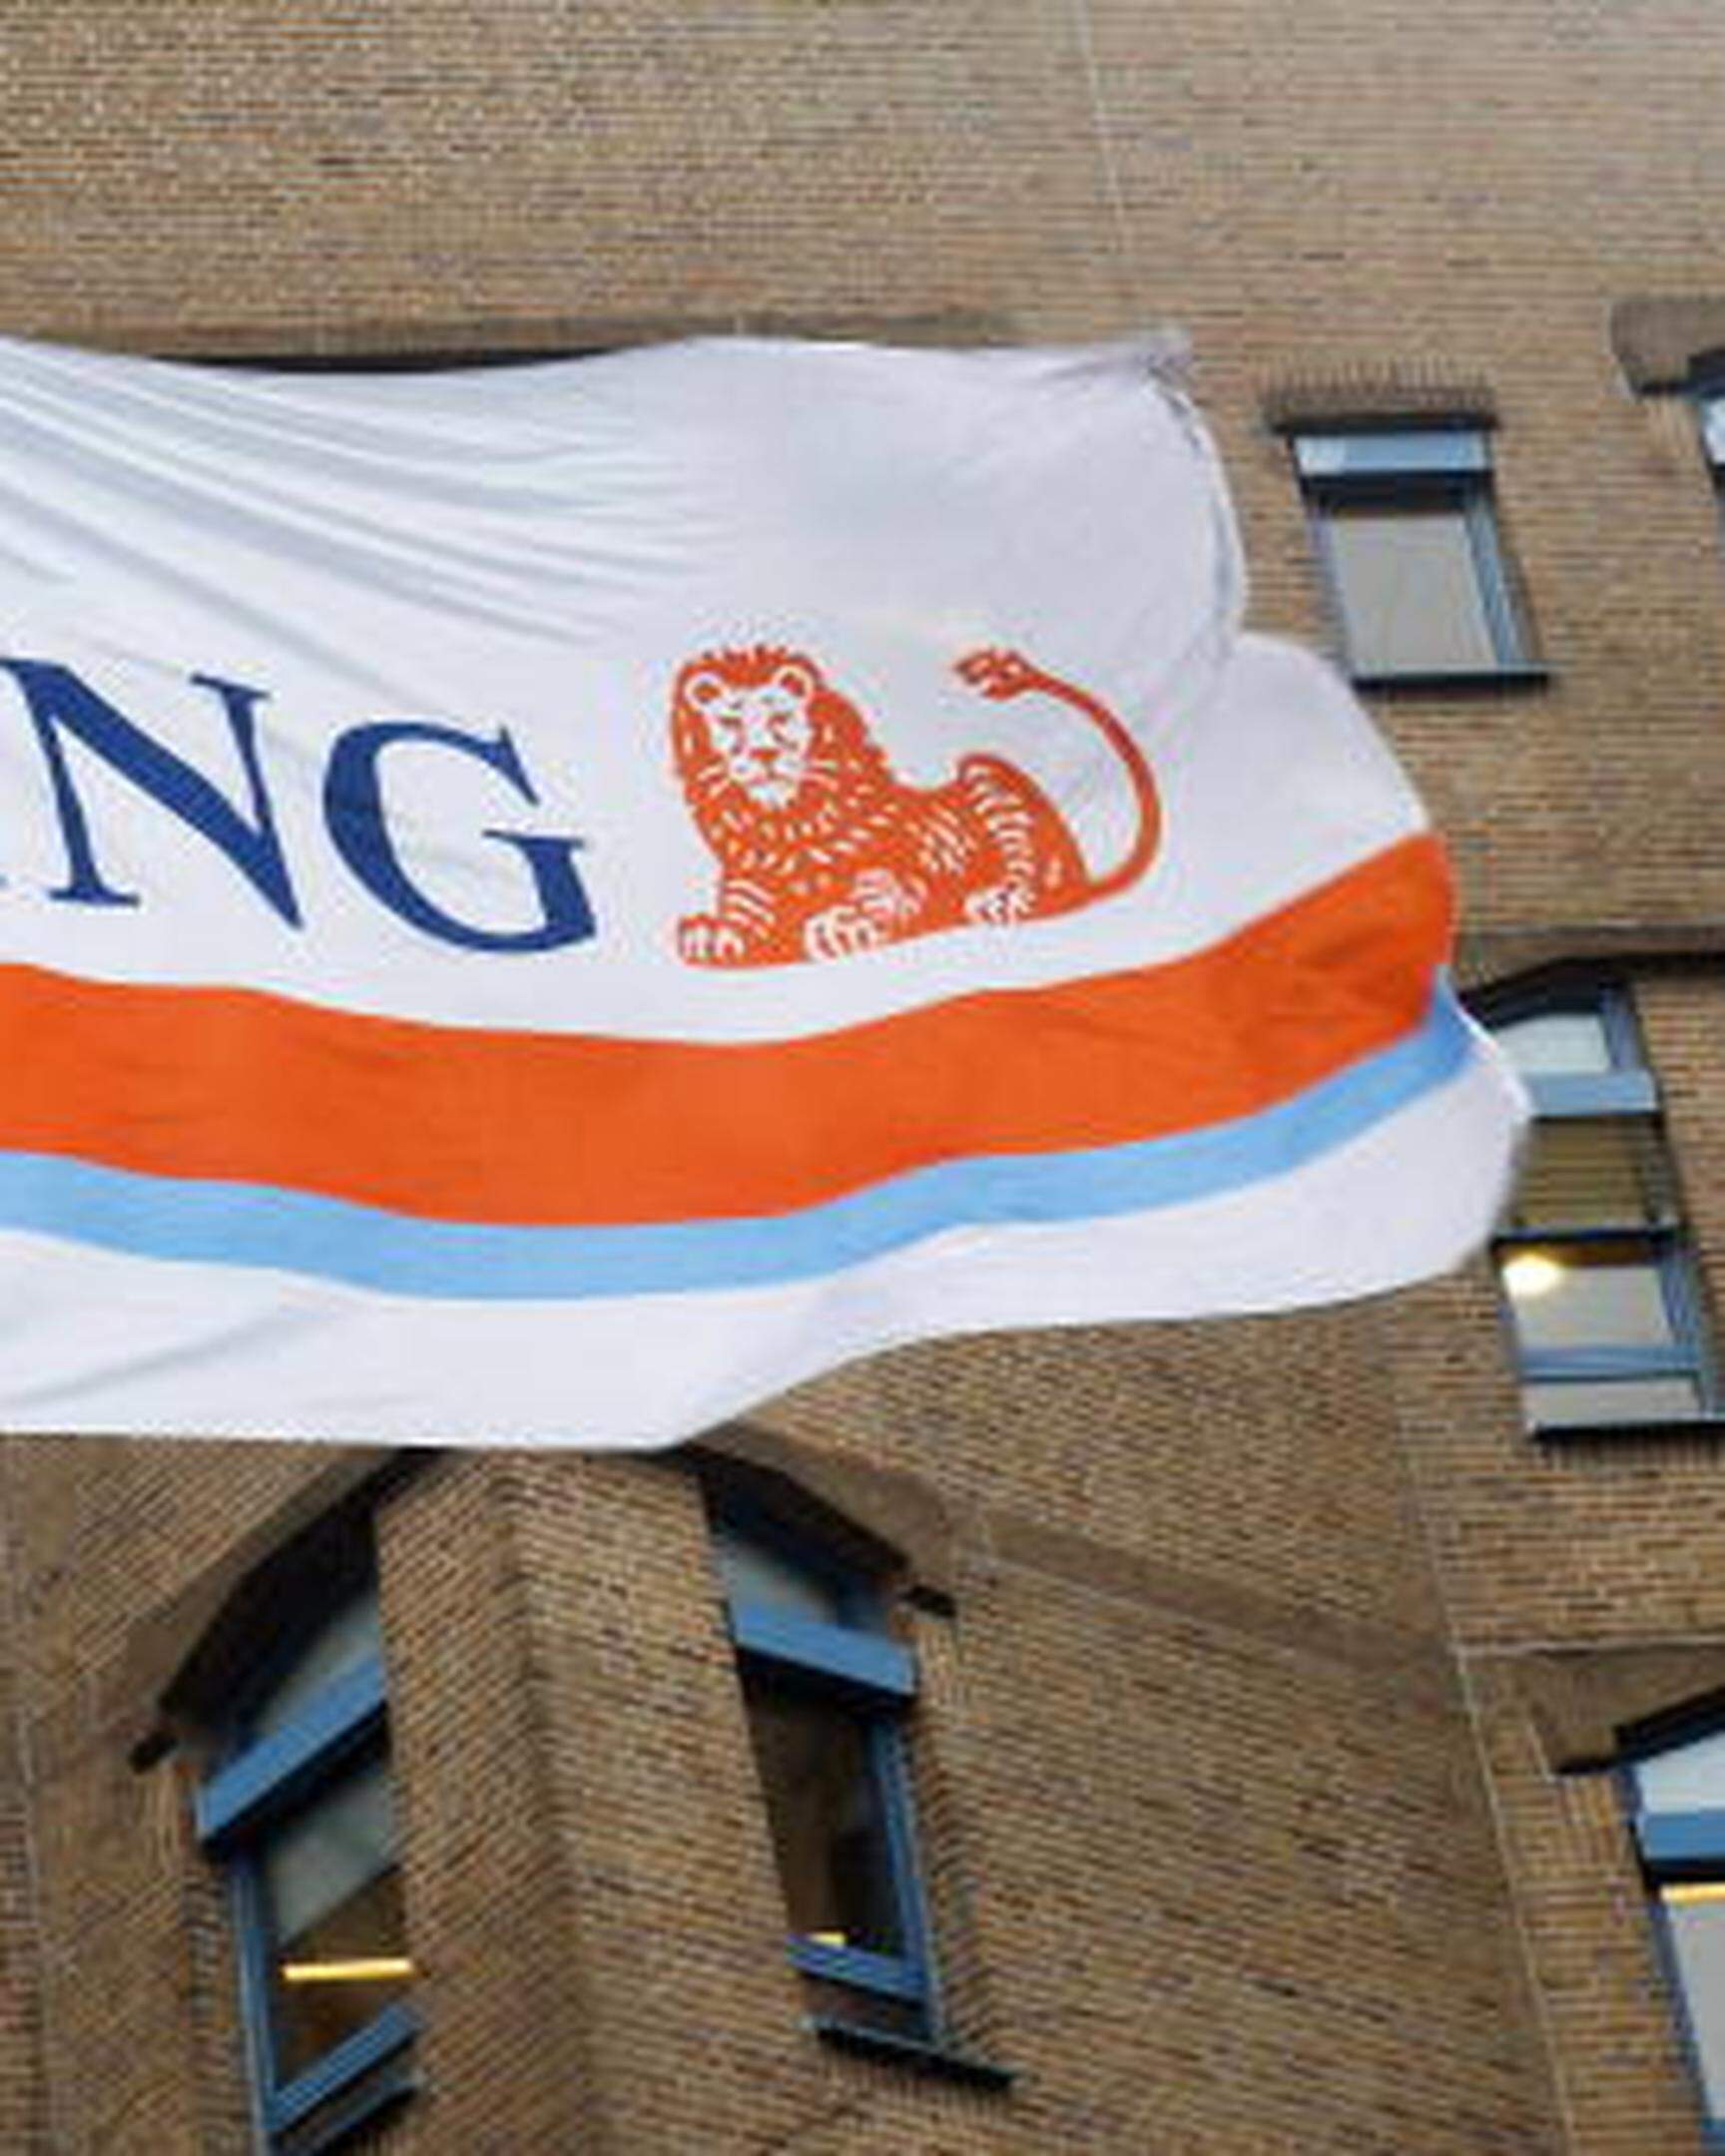 A flag showing the logo of ING Group NV flutters in the wind at a branch office in Amsterdam January 9, 2014. ING Group NV said it will make its defined-benefit pension fund financially independent, resulting in an after-tax charge of about 1.2 billion euros ($1.6 billion) and paving the way for a stock market listing of its insurance business. The charge will be booked as a special item in the first quarter of 2014, of which 800 million euros will be attributed to ING Bank and 400 million to ING Insurance.    REUTERS/Toussaint Kluiters/United Photos   (NETHERLANDS - Tags: BUSINESS LOGO)